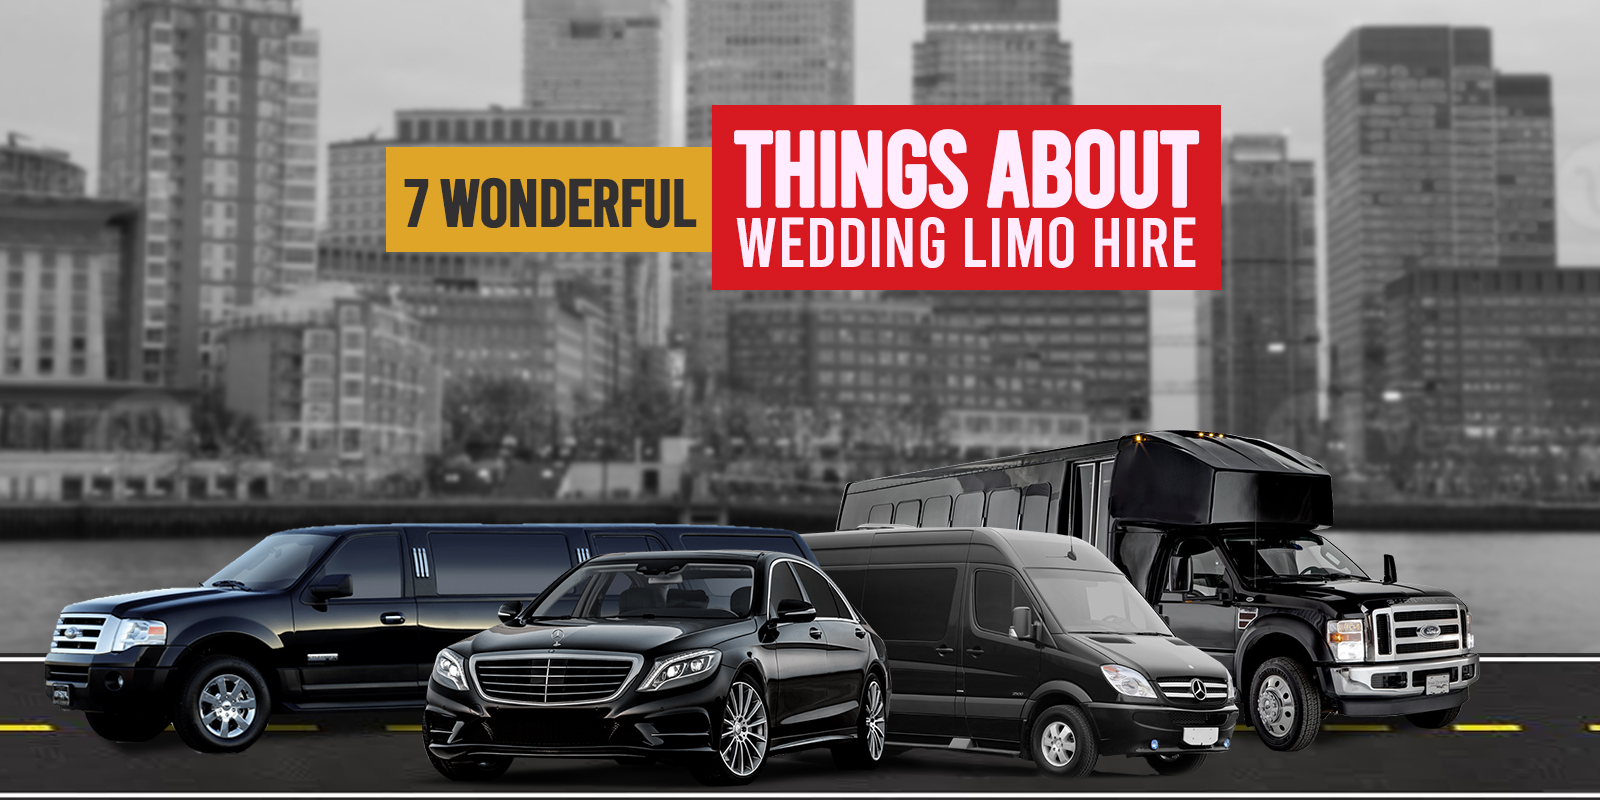 7 Wonderful Things About Wedding Limo Hire